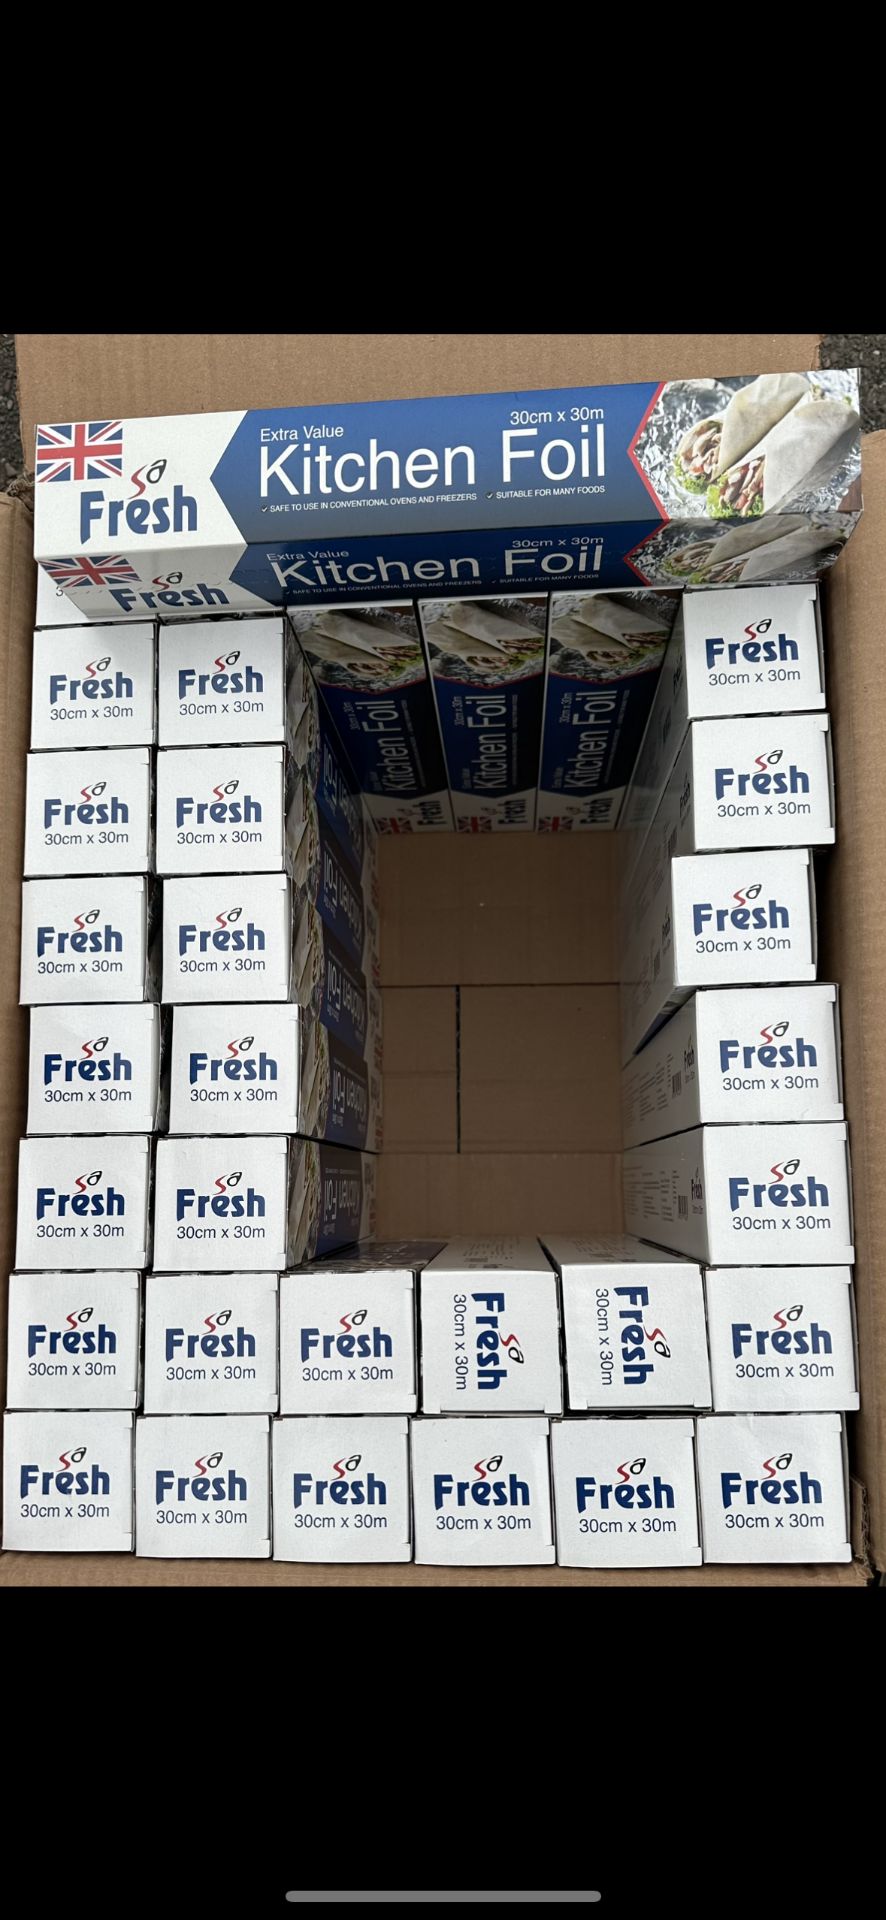 480X EXTRA VALUE KITCHEN FOIL 30CMX30M CATERING SUPPLIES